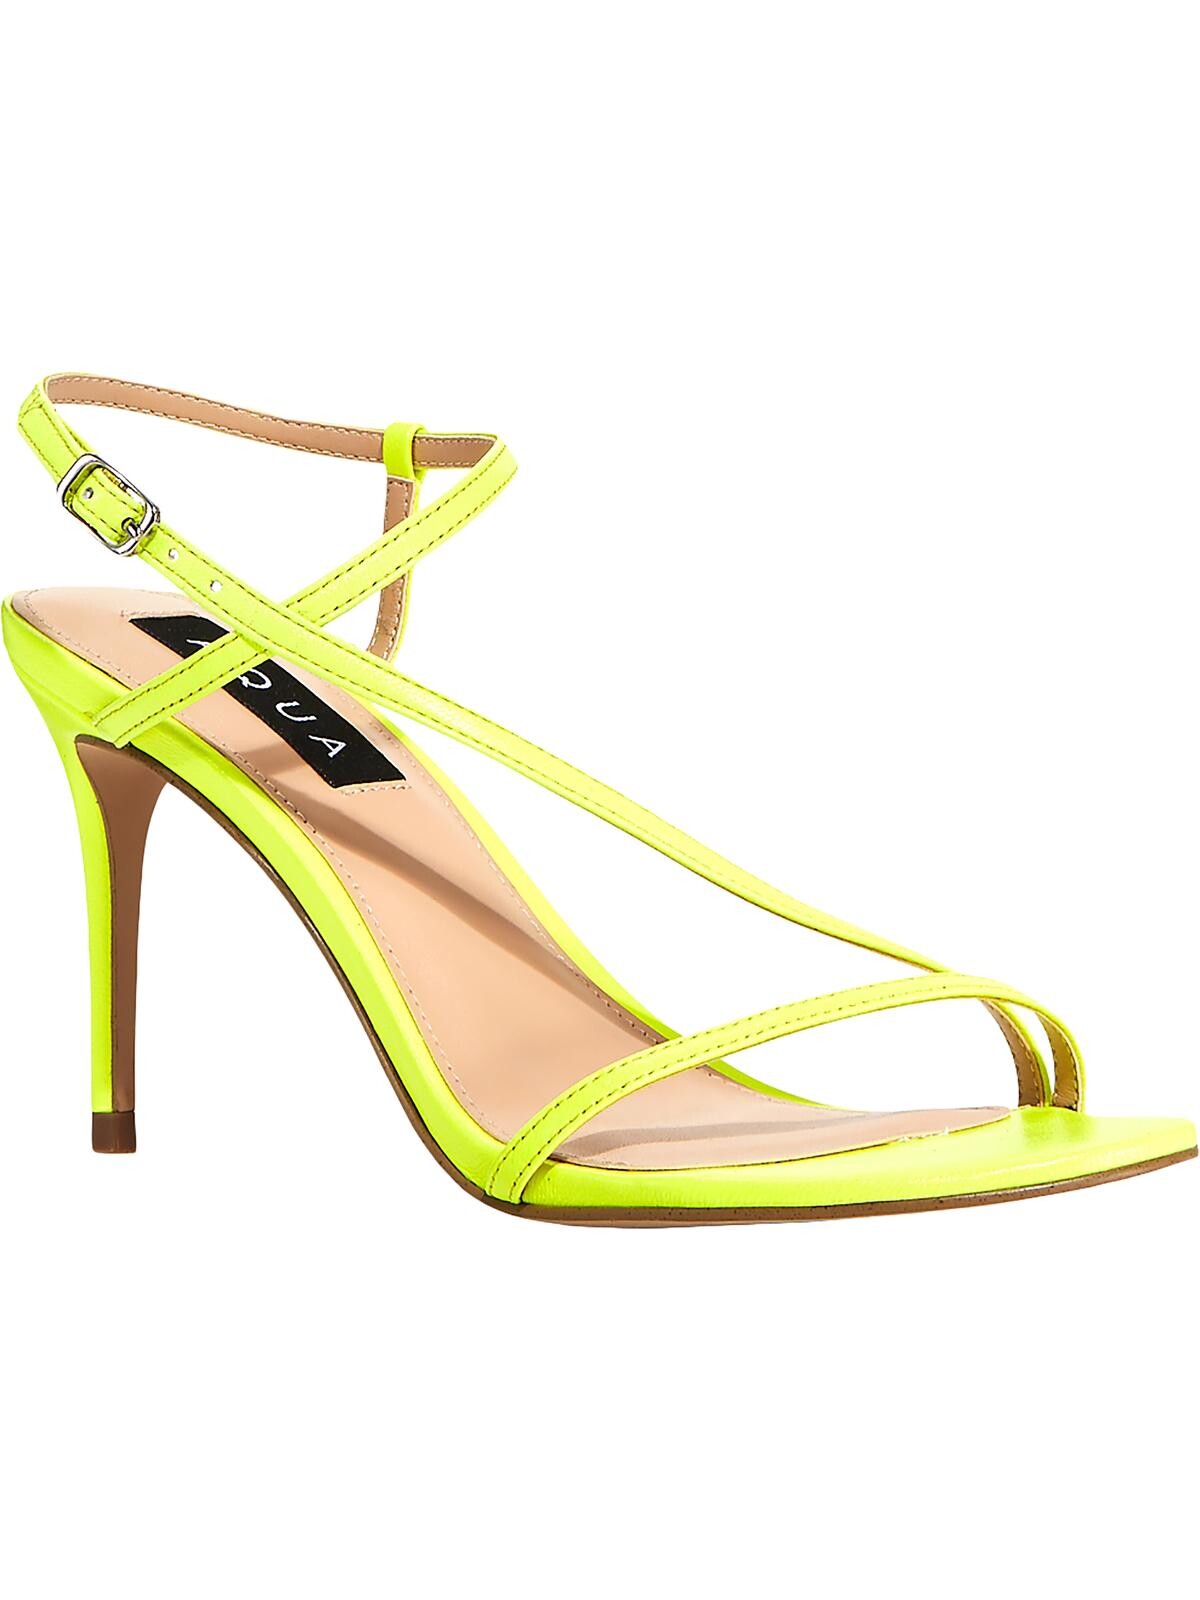 AQUA Womens Yellow Strappy Padded Ron Round Toe Stiletto Buckle Leather Slingback Sandal 6.5 M